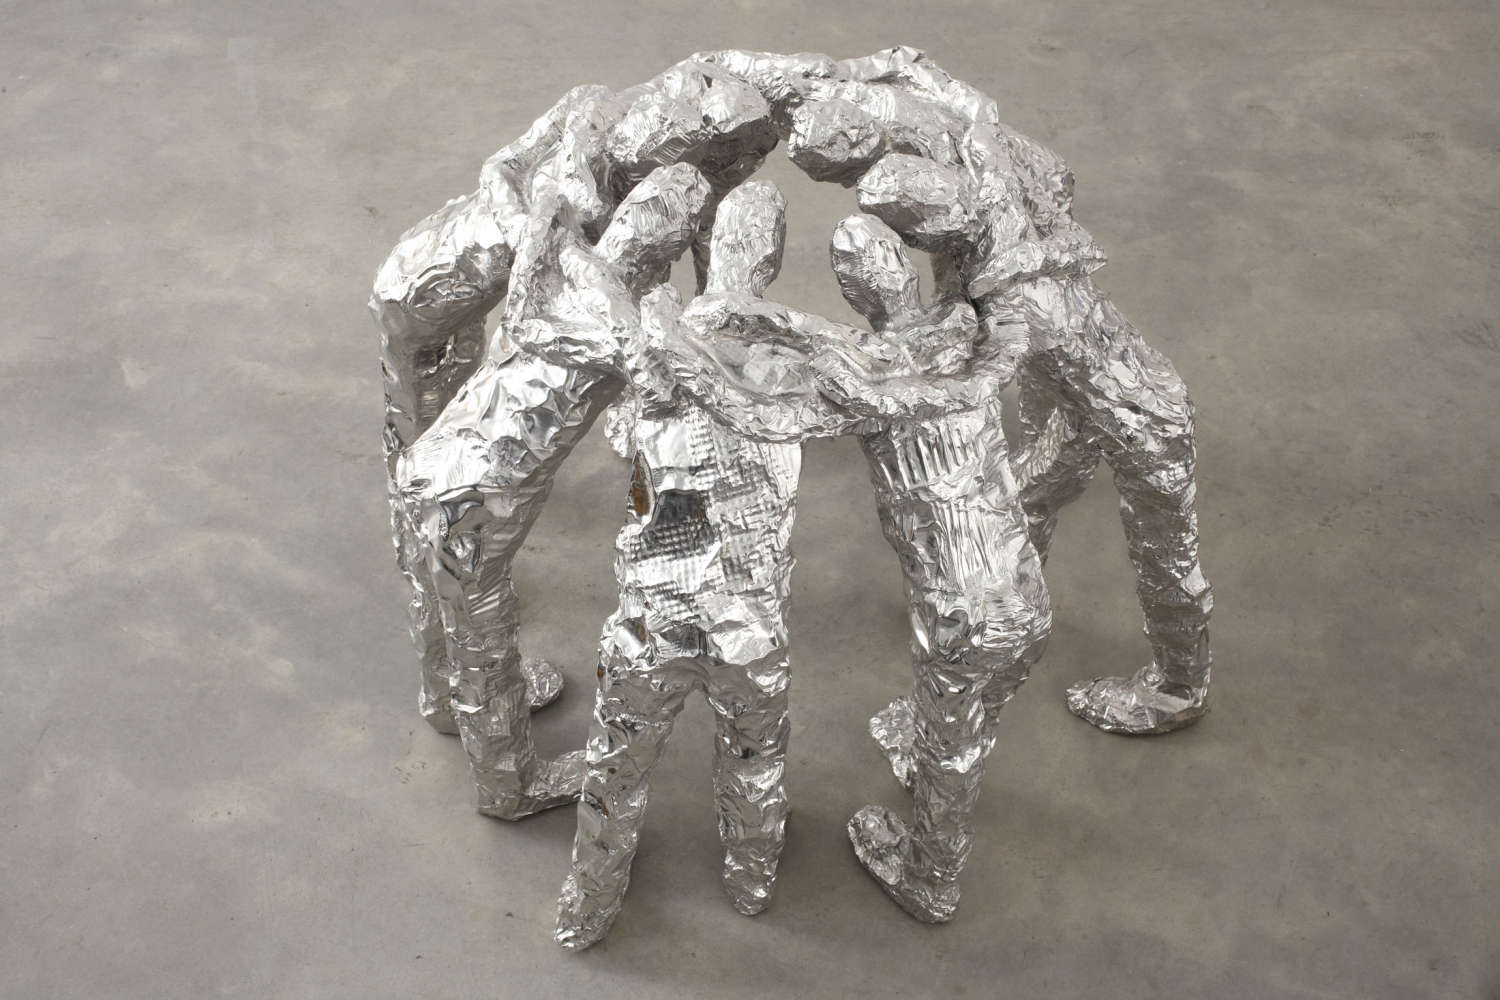 Tom Friedman
Huddle, 2013
Stainless steel
34 x 47 inches
(86.36 x 119.38 cm)